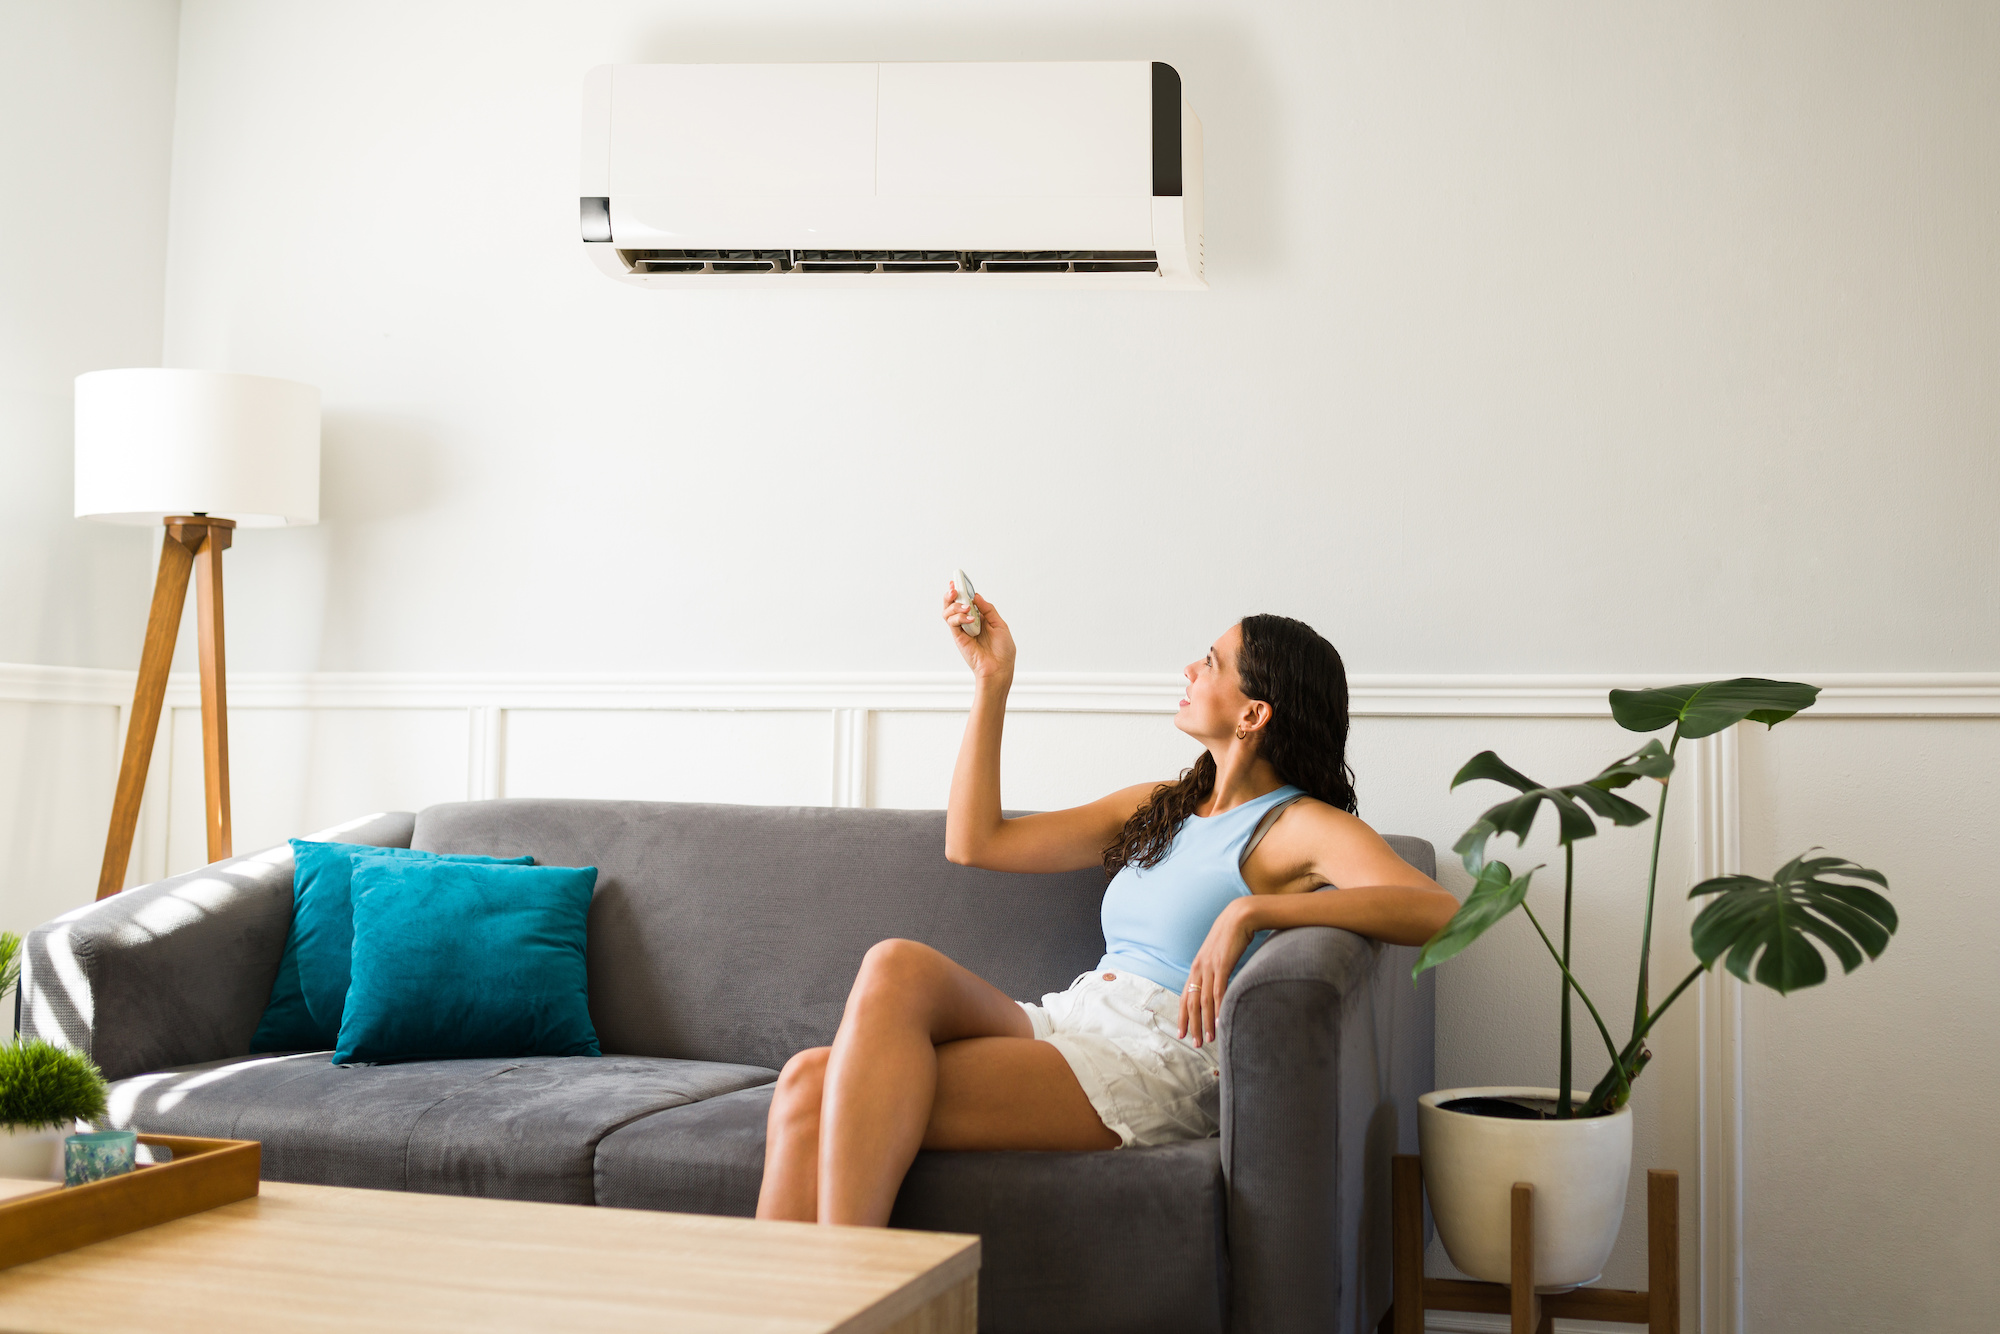 A young woman at home using her refrigerated air conditioner to stay cool while sitting in her living room.